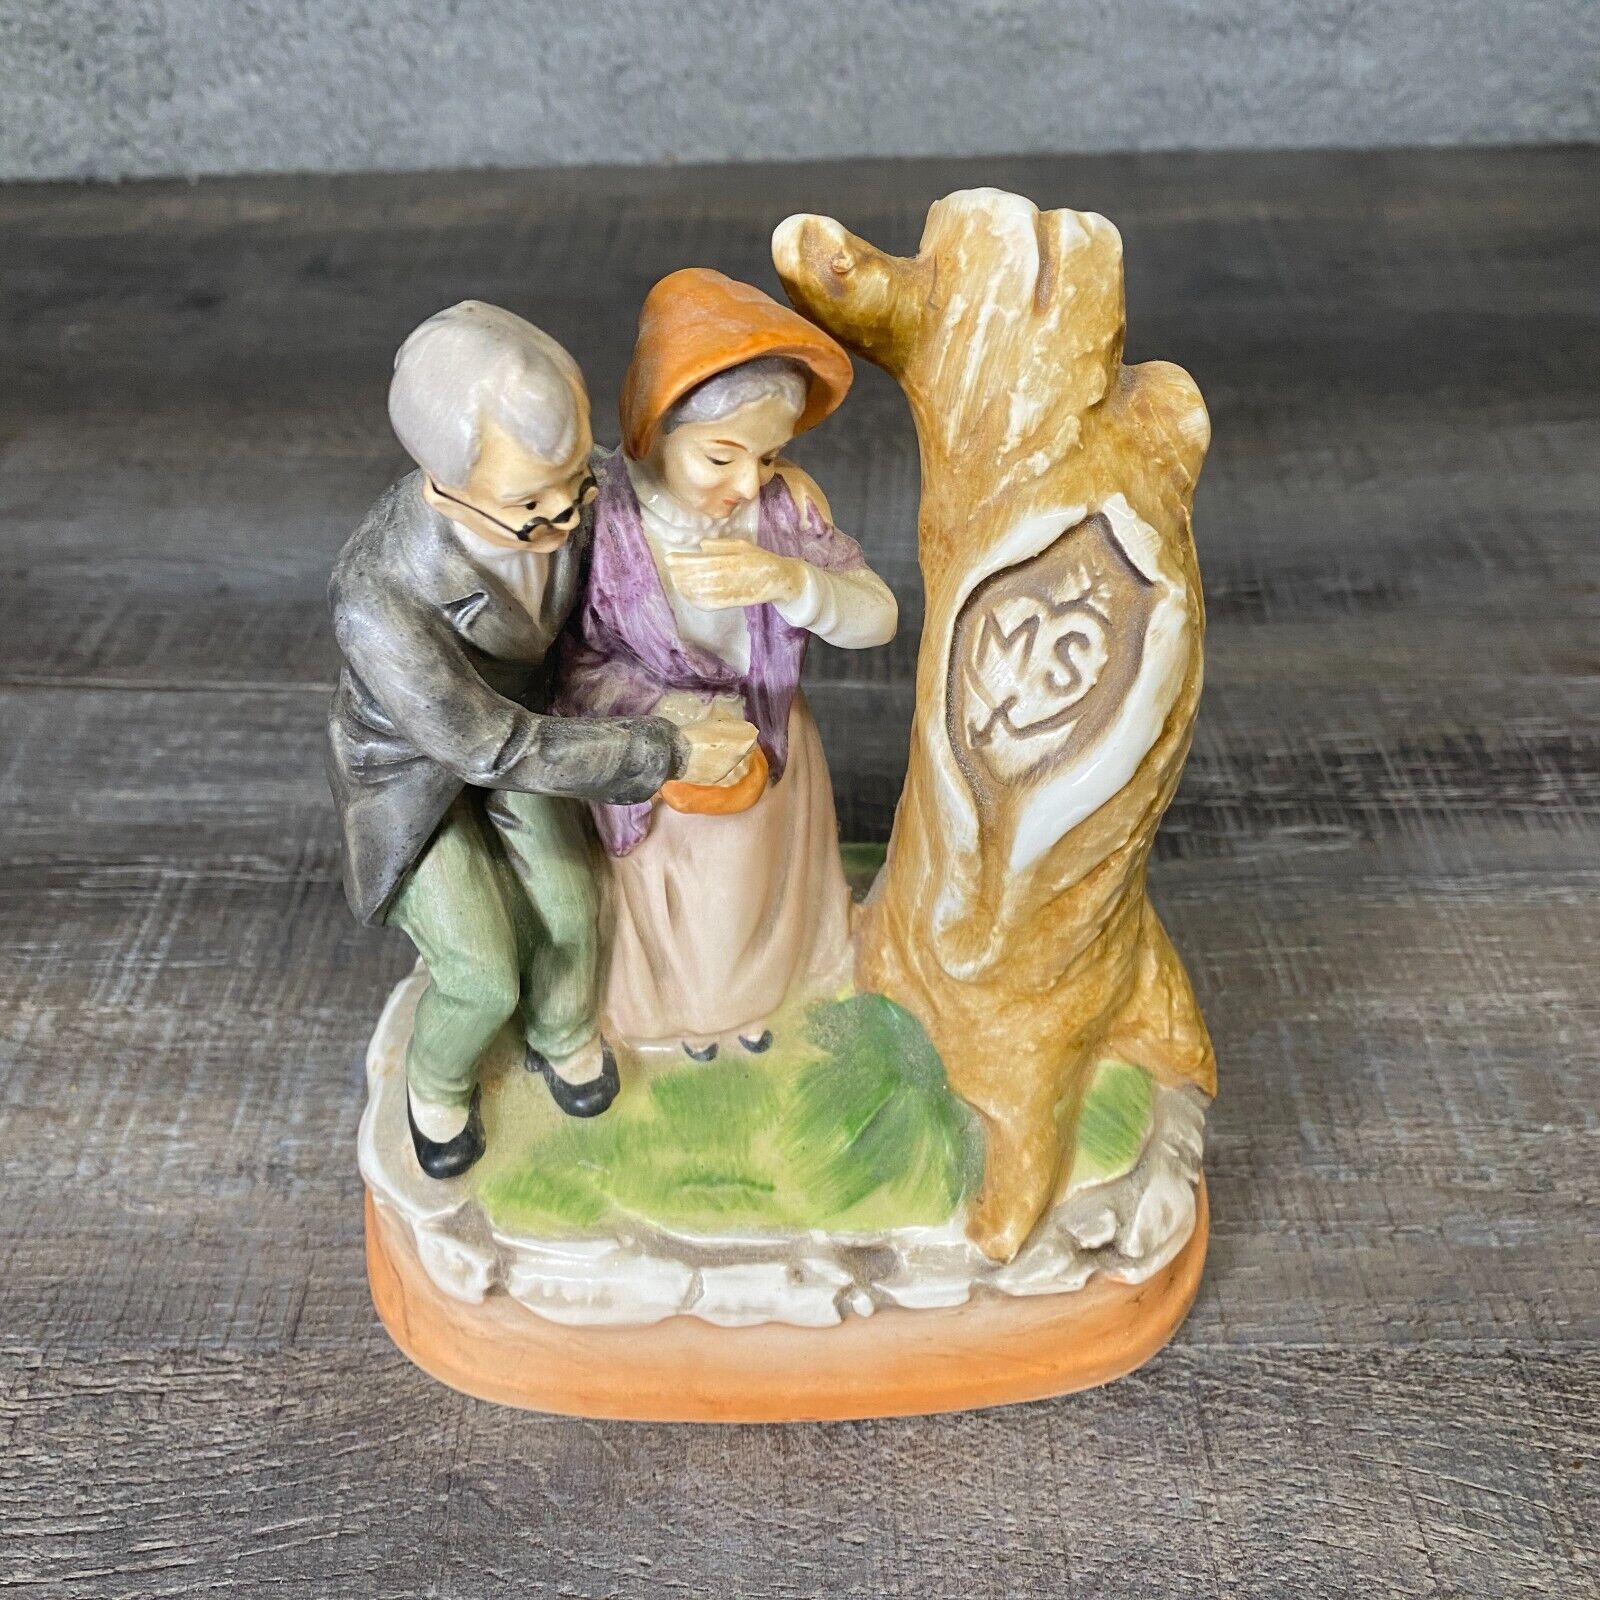 Vintage Old Couple By The Tree Through the Years Figurine 7\